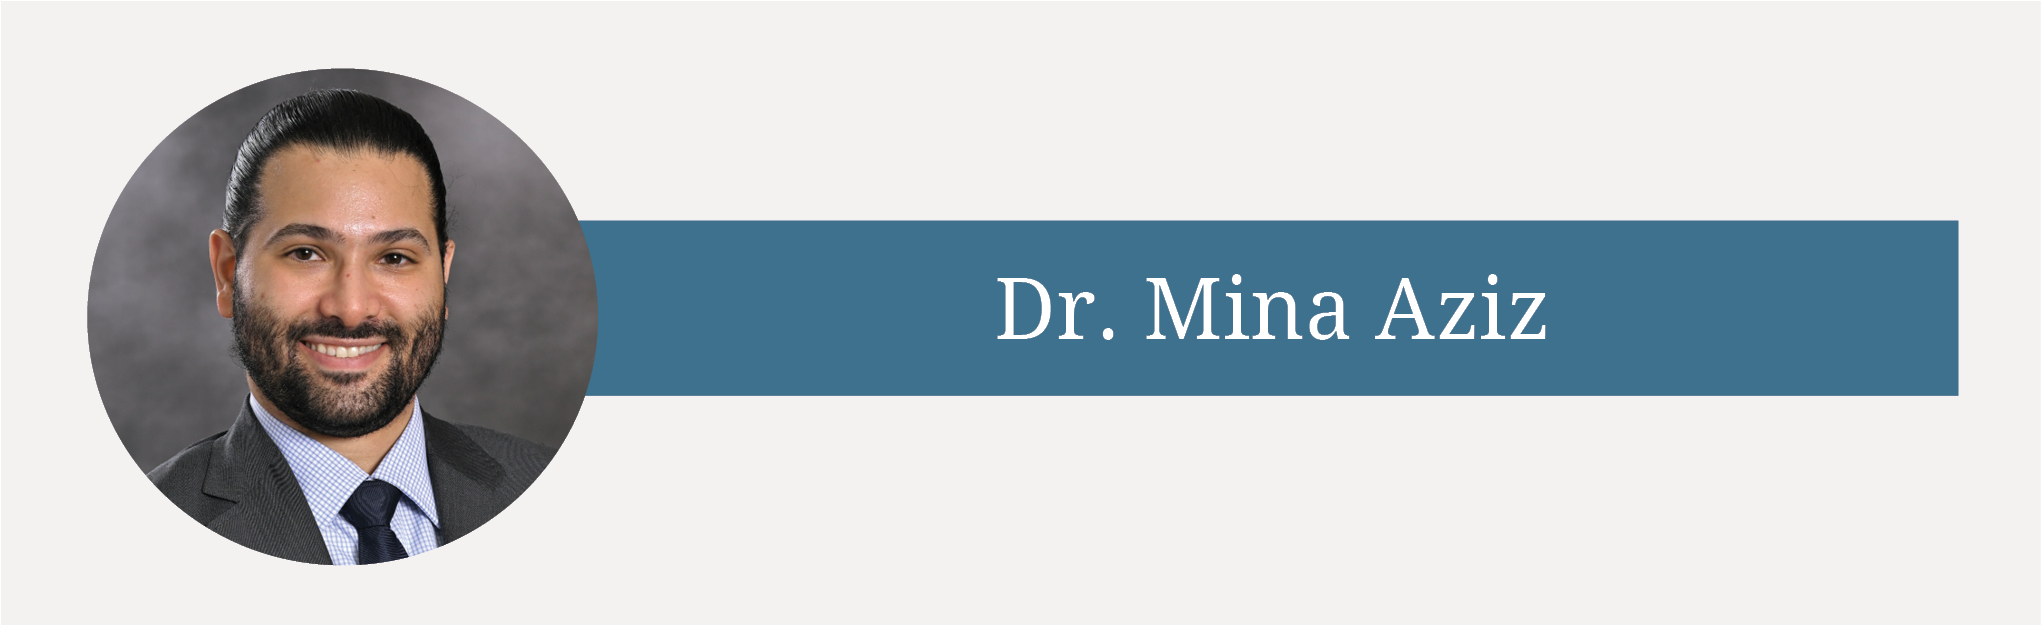 Dr. Mina Aziz Joins WPHPA Westchester Dermatology and Mohs Surgery